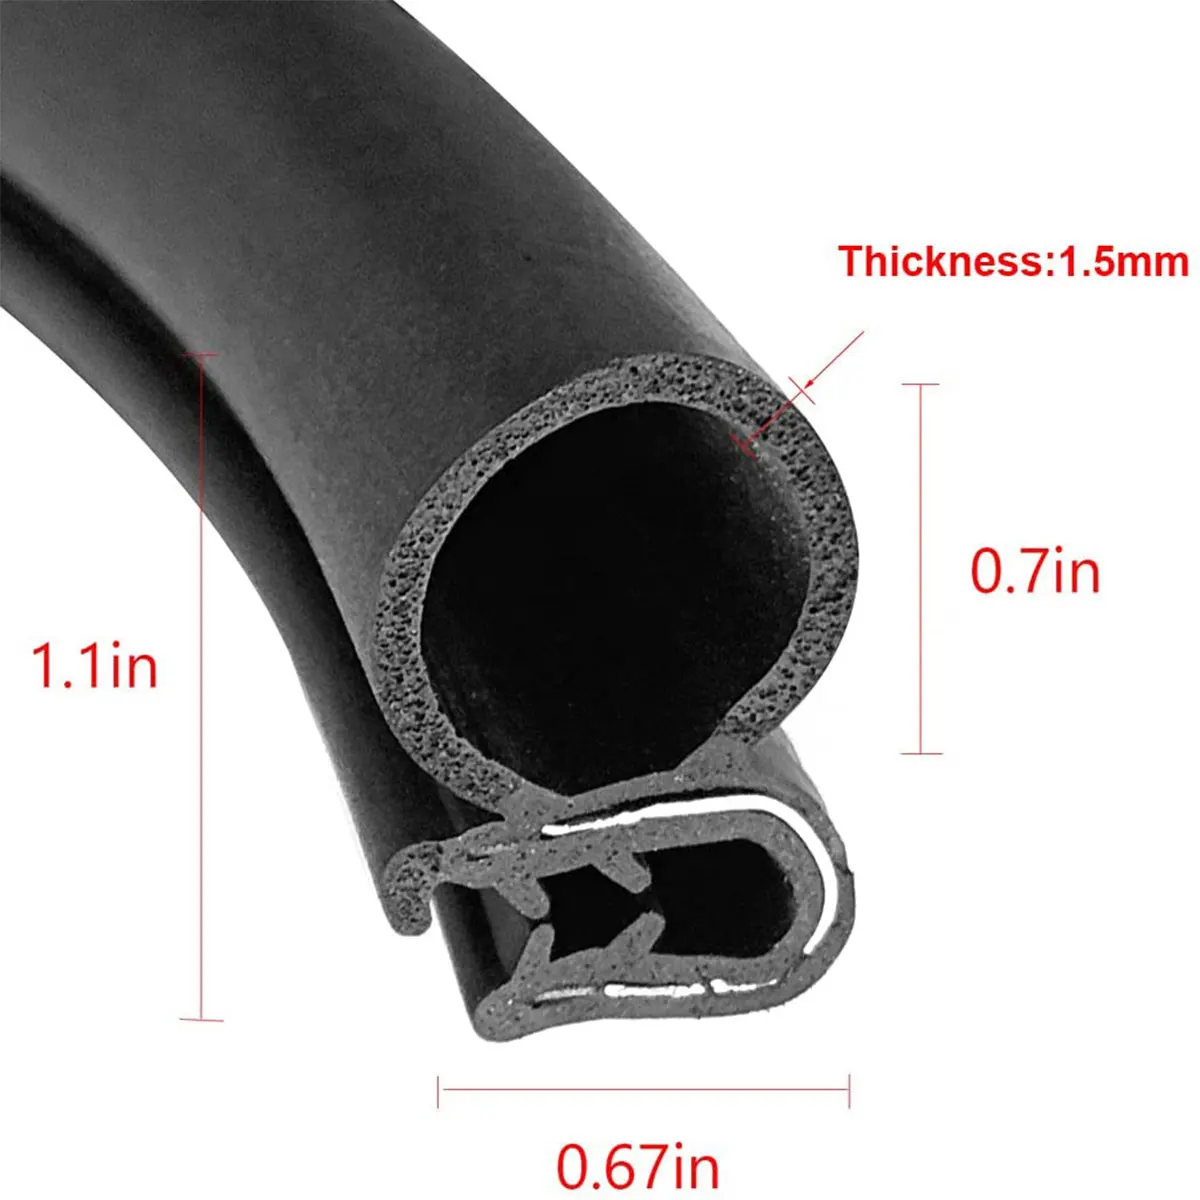 Car Door Rubber Seal Strip Automotive Weather Stripping for Boats, Automobile, RVs, Trucks, and Home Applications